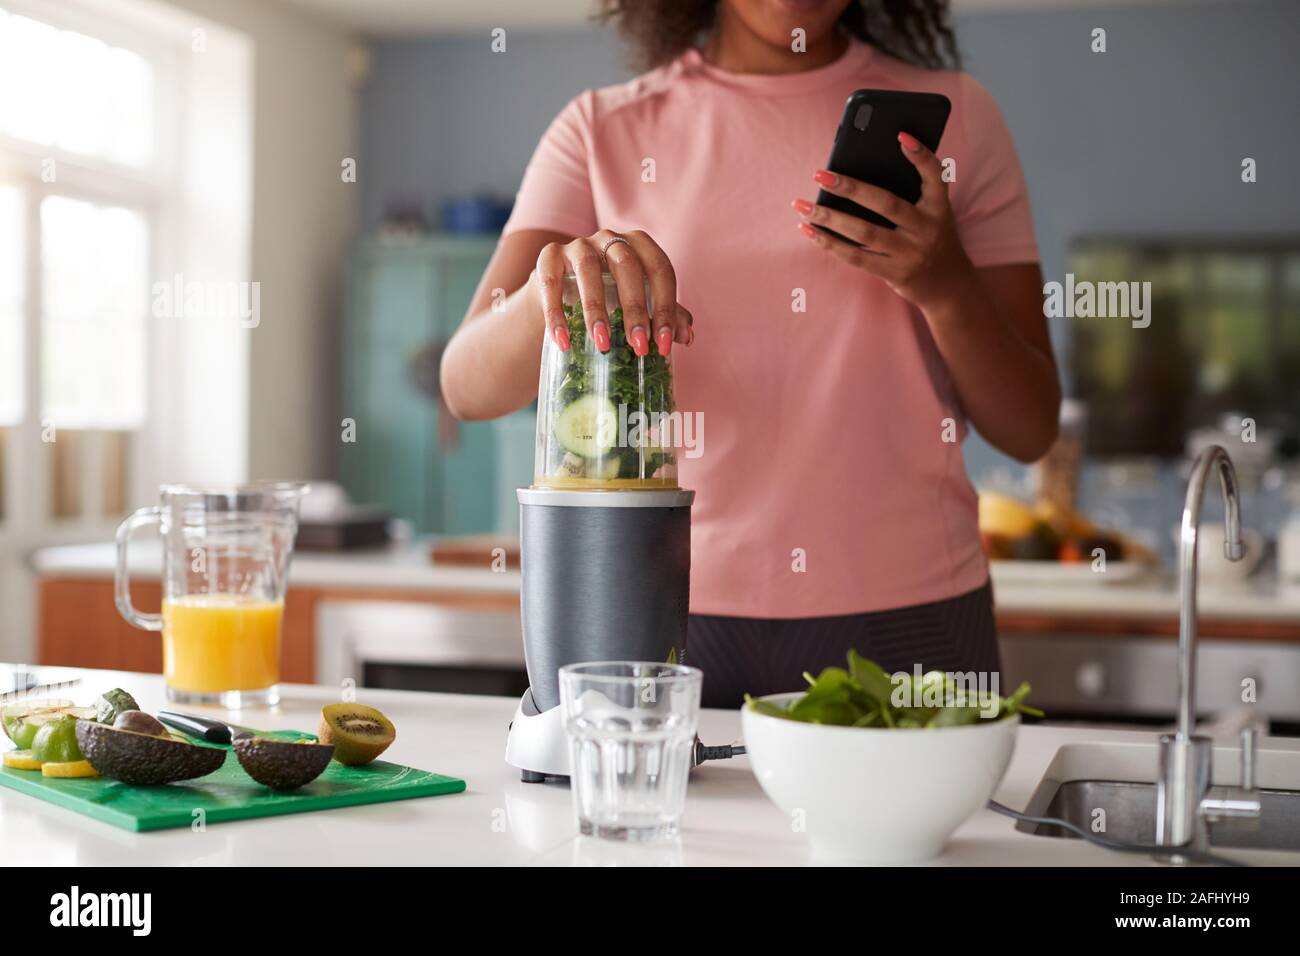 Close Up Of Woman Using Fitness Tracker To Count Calories For Post Workout Juice Drink She Is Making Stock Photo